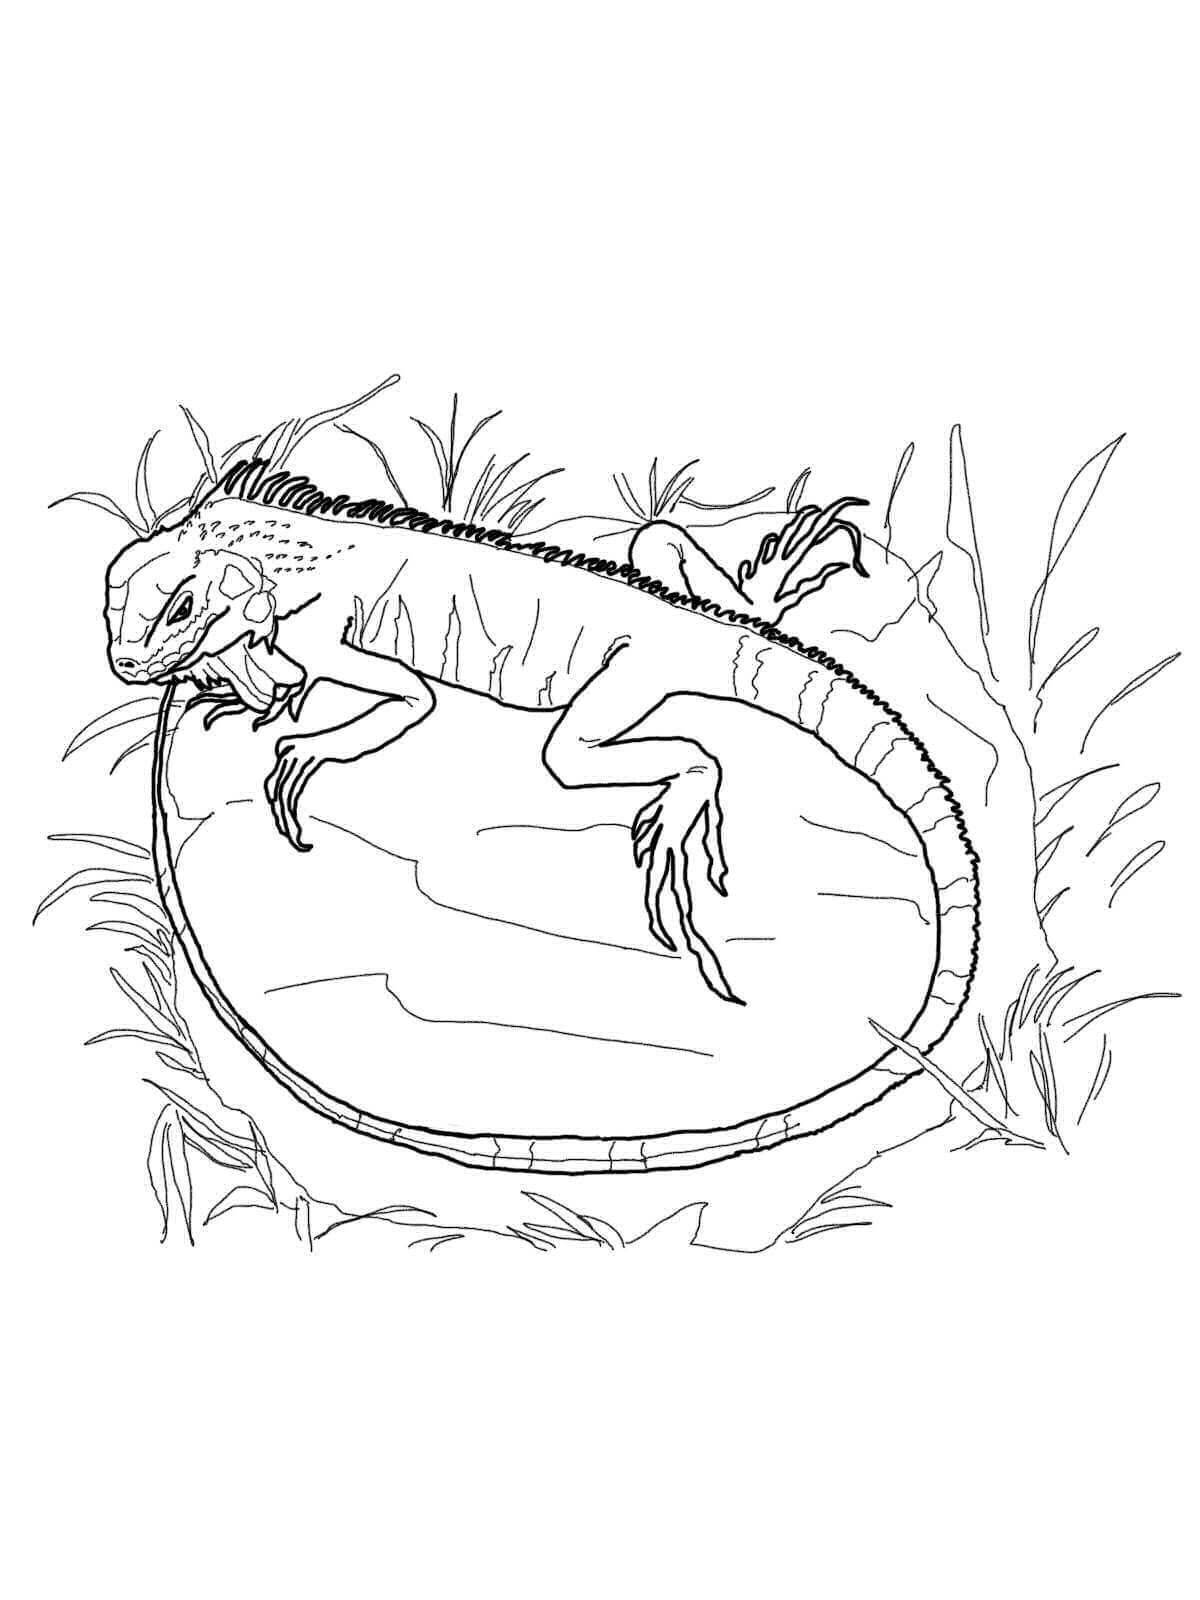 Coloring book playful bearded dragon